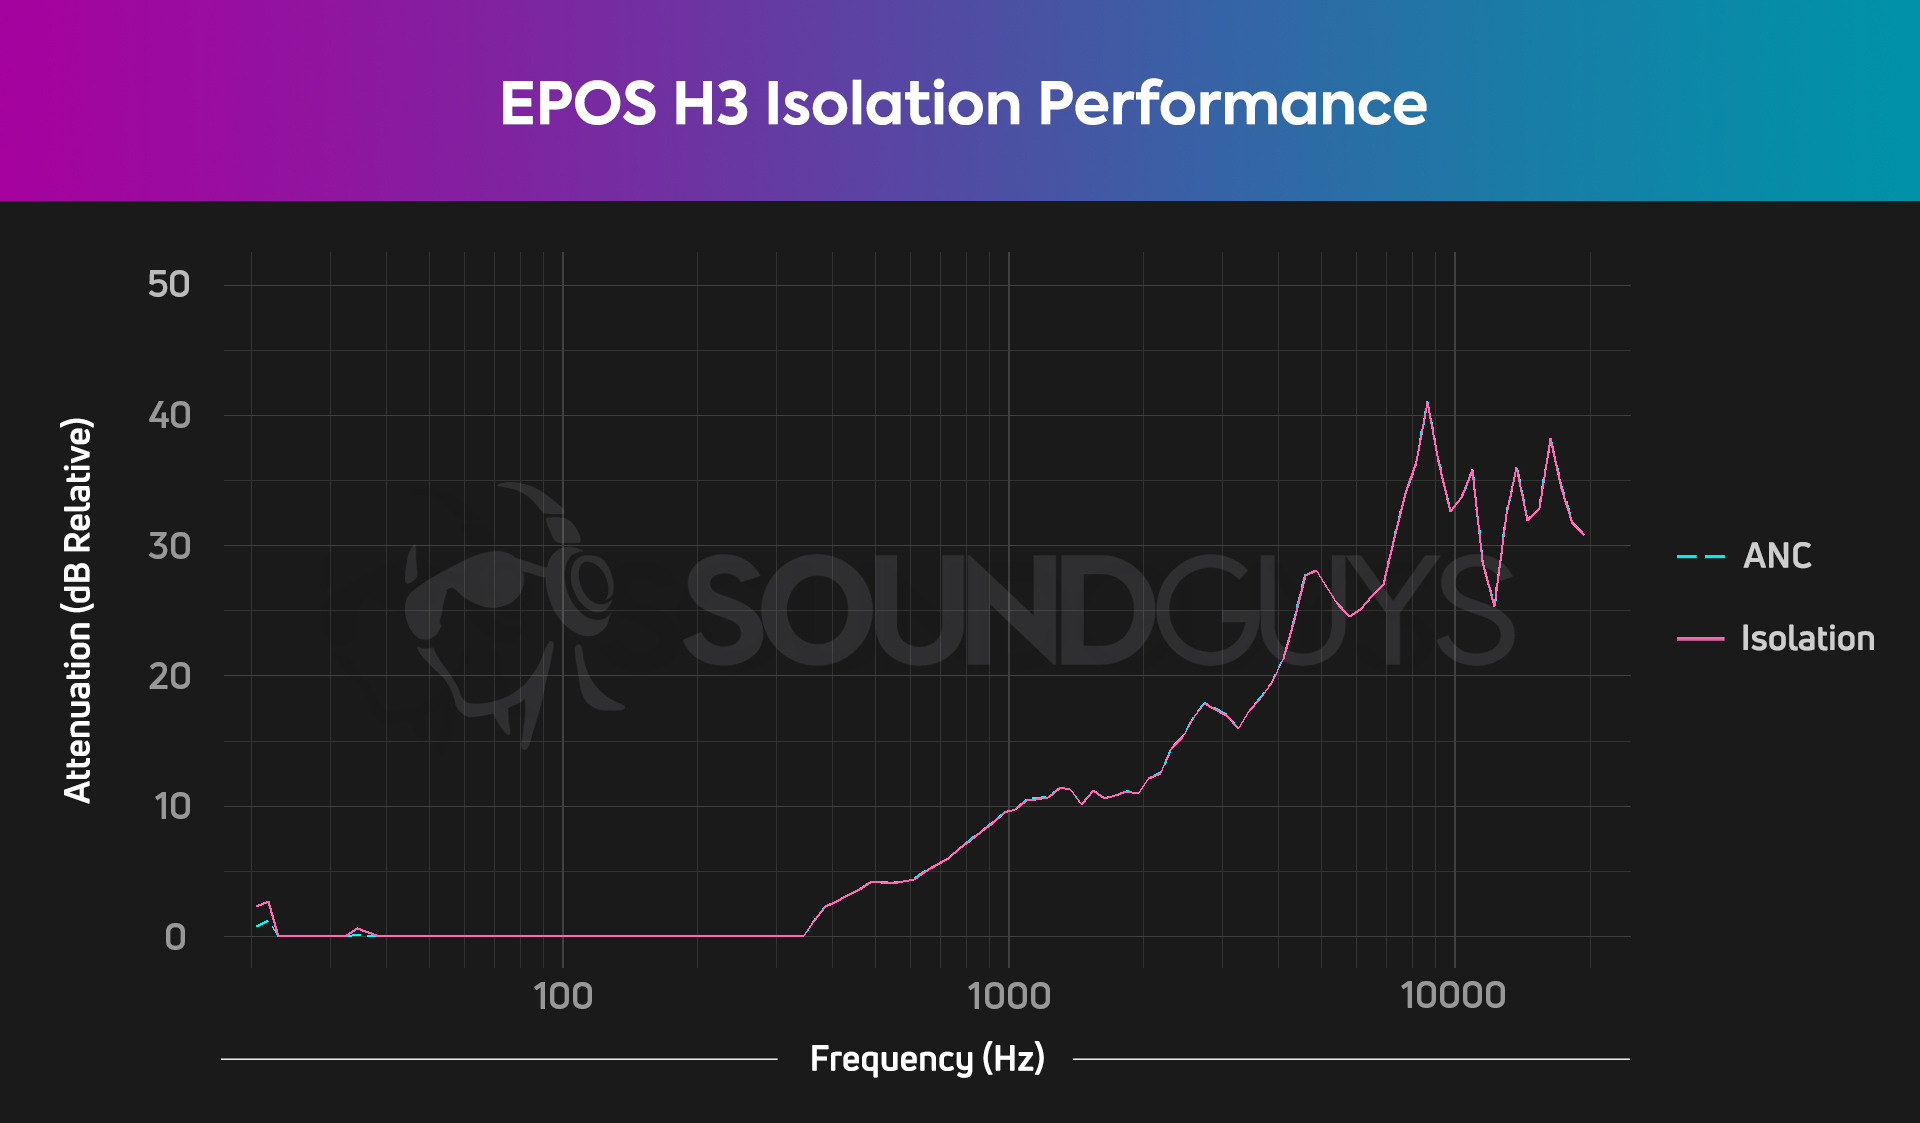 An isolation chart for the EPOS H3 gaming headset, which shows pretty average isolation.